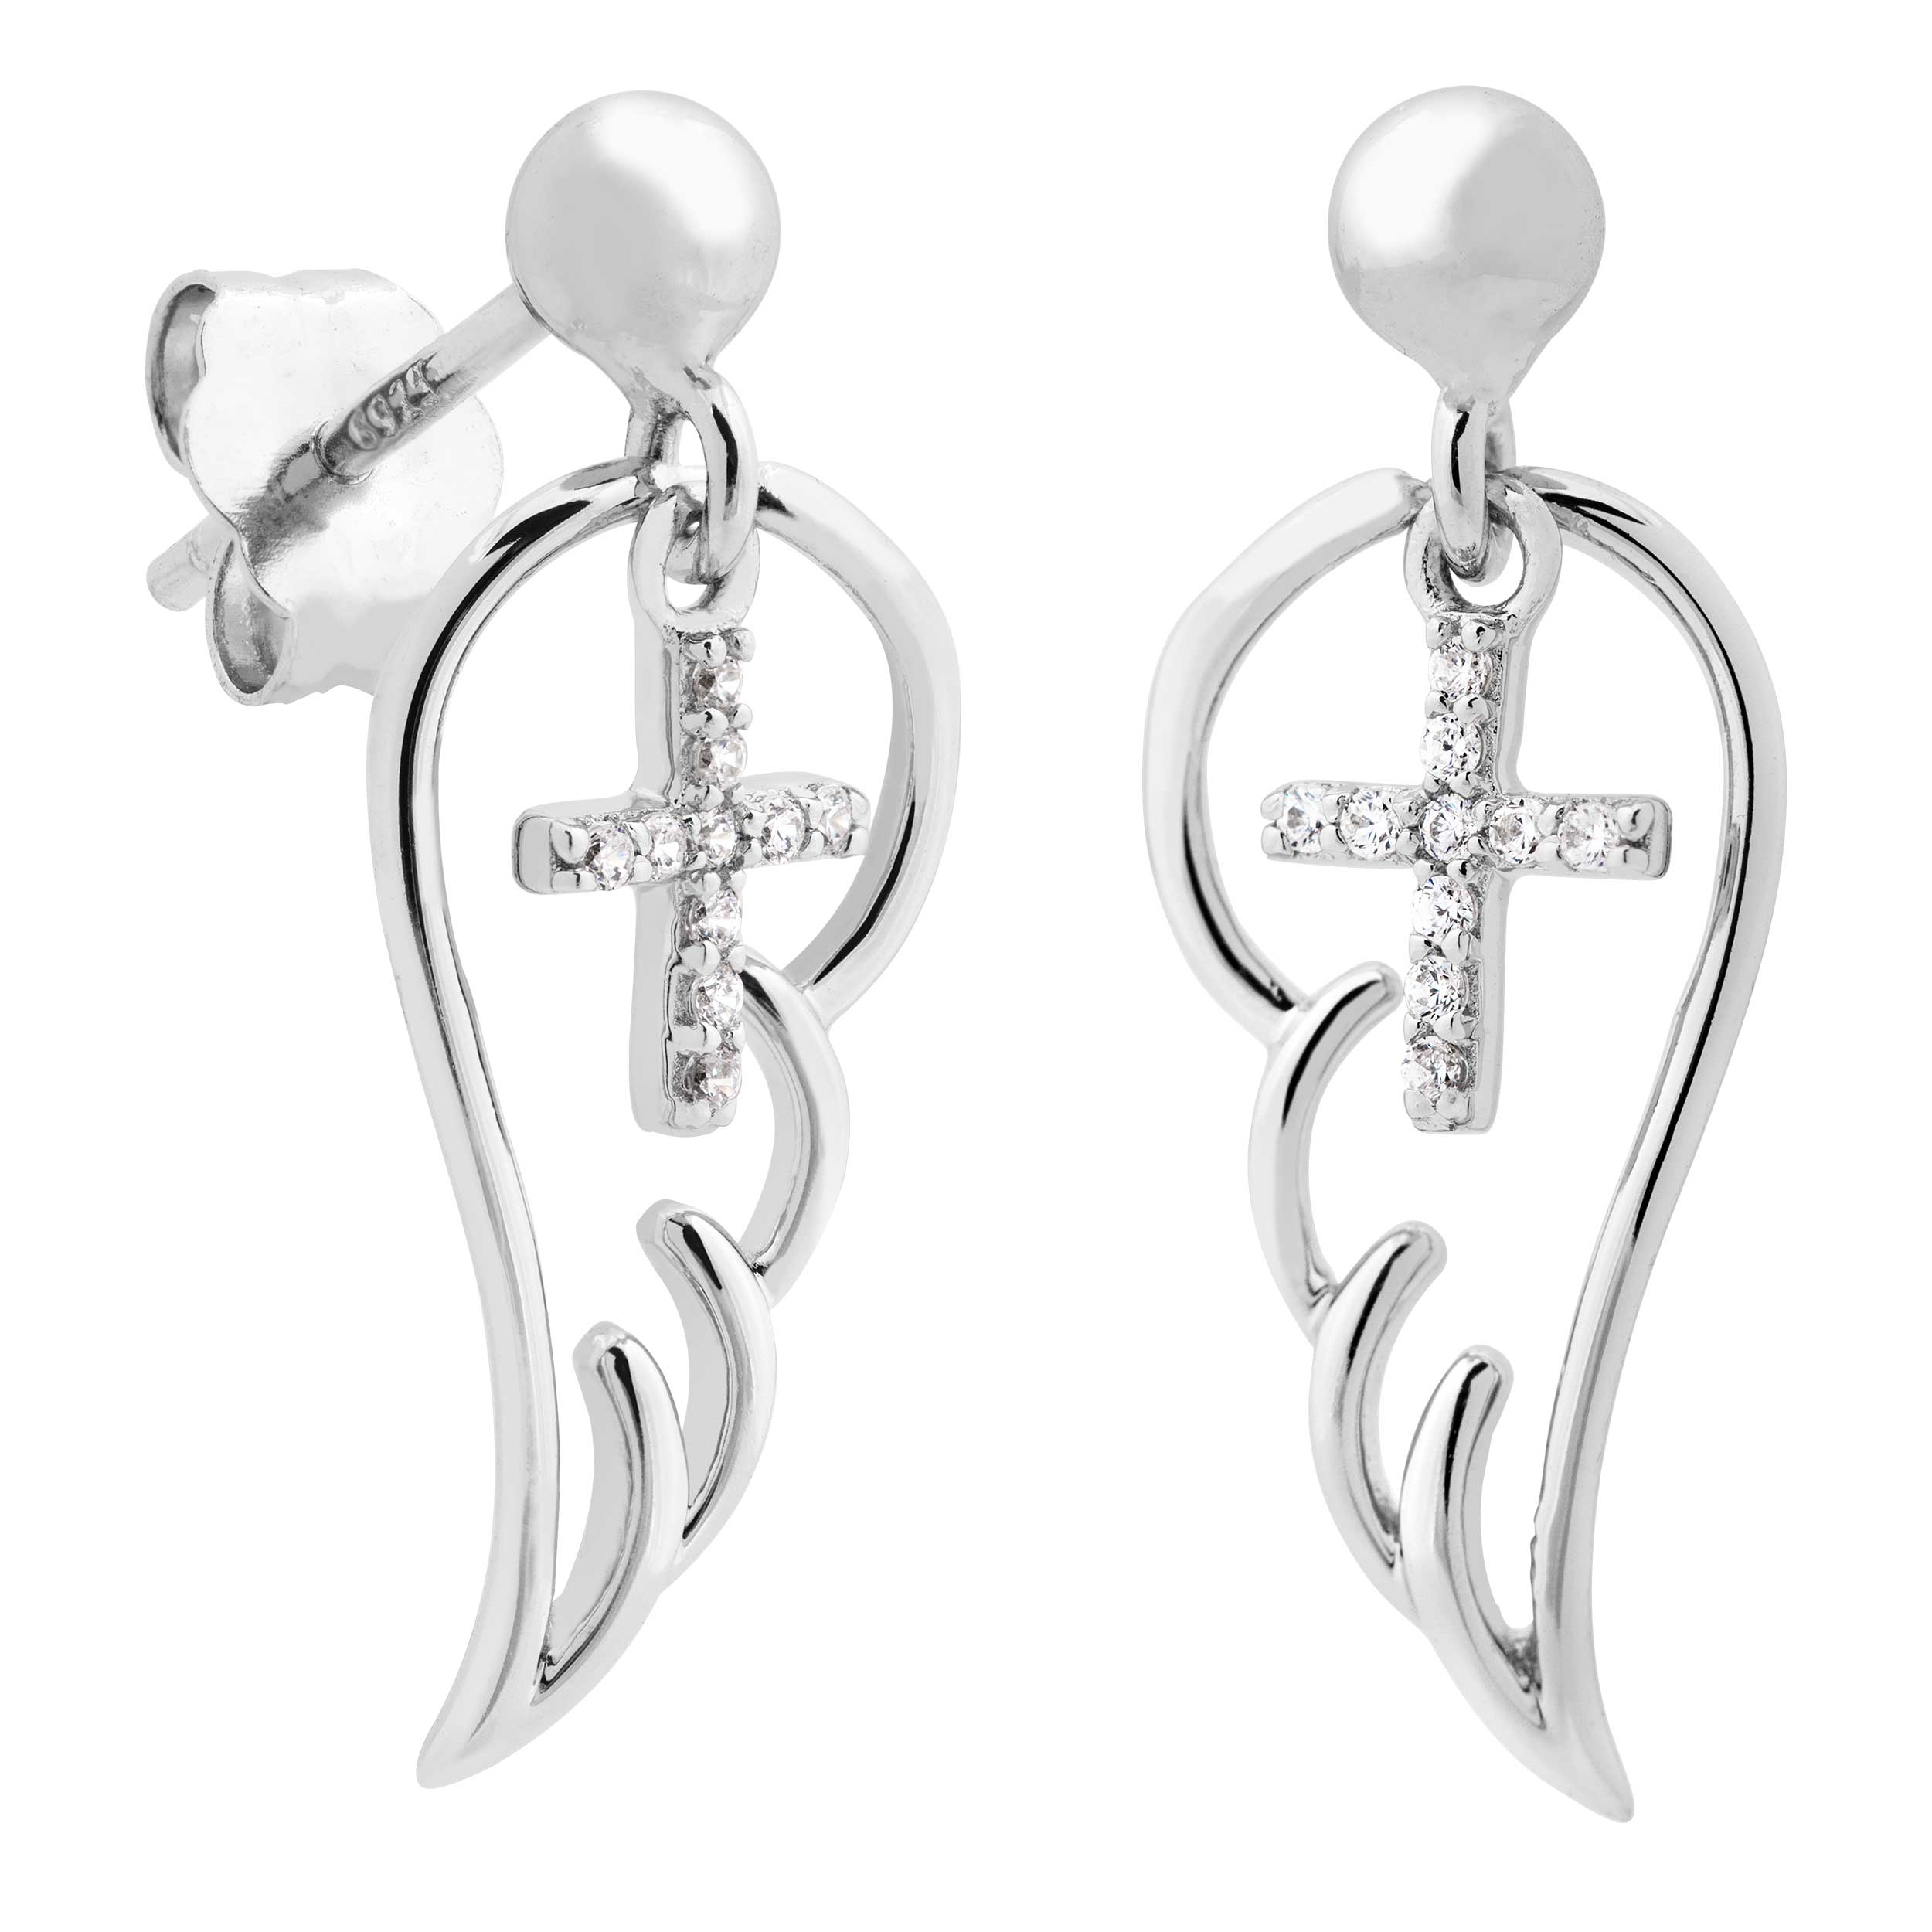 Mirro Polished Angel Wing, Cross with CZ's Earrings, Sterling Silver